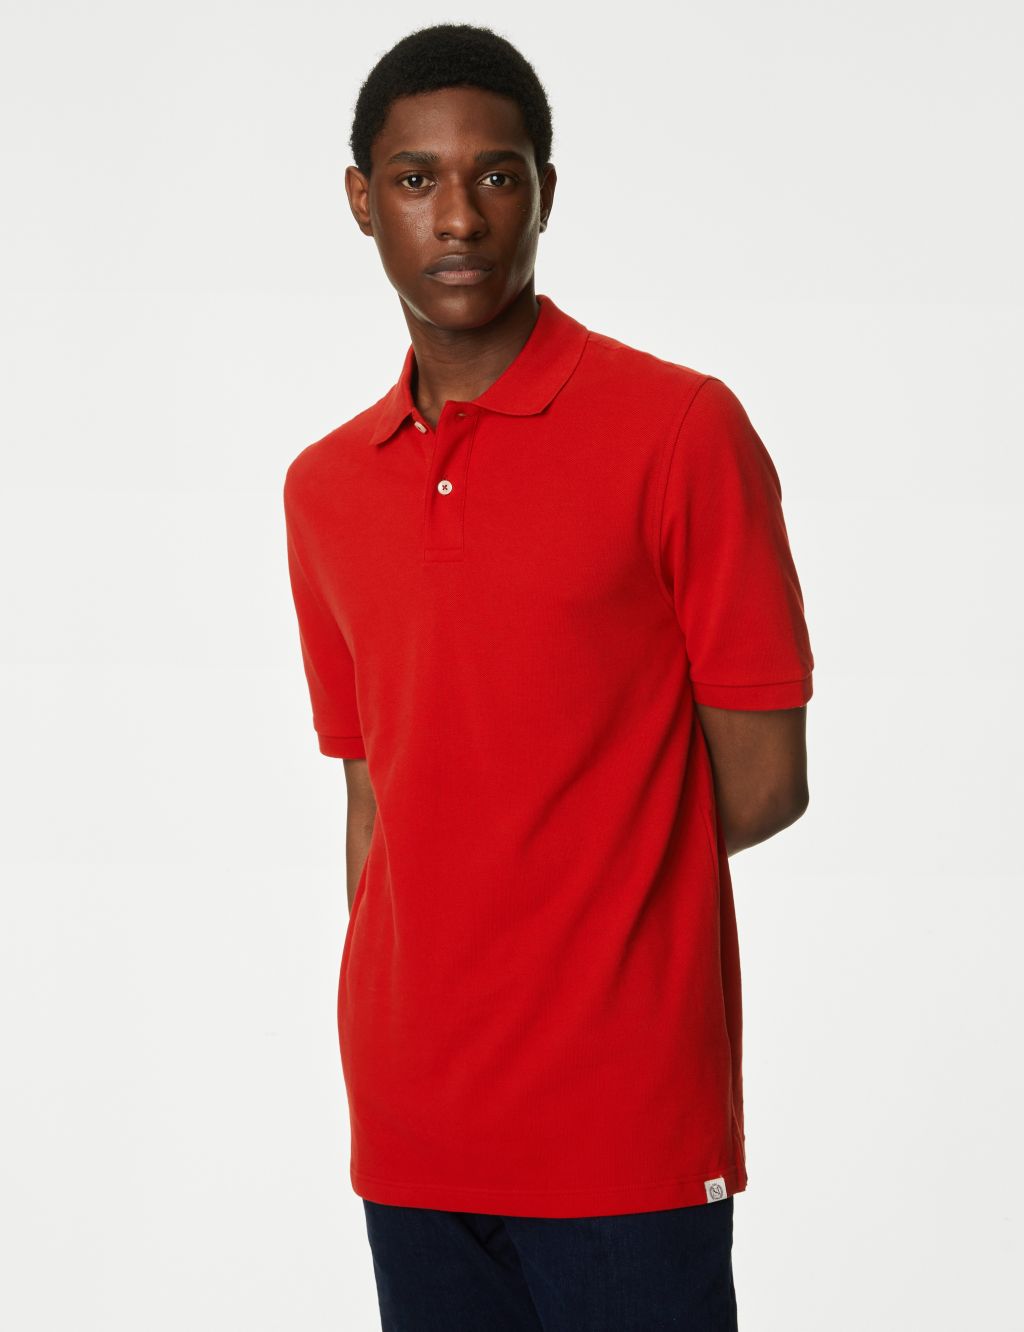 Shop Men’s Red Polo Shirts at M&S